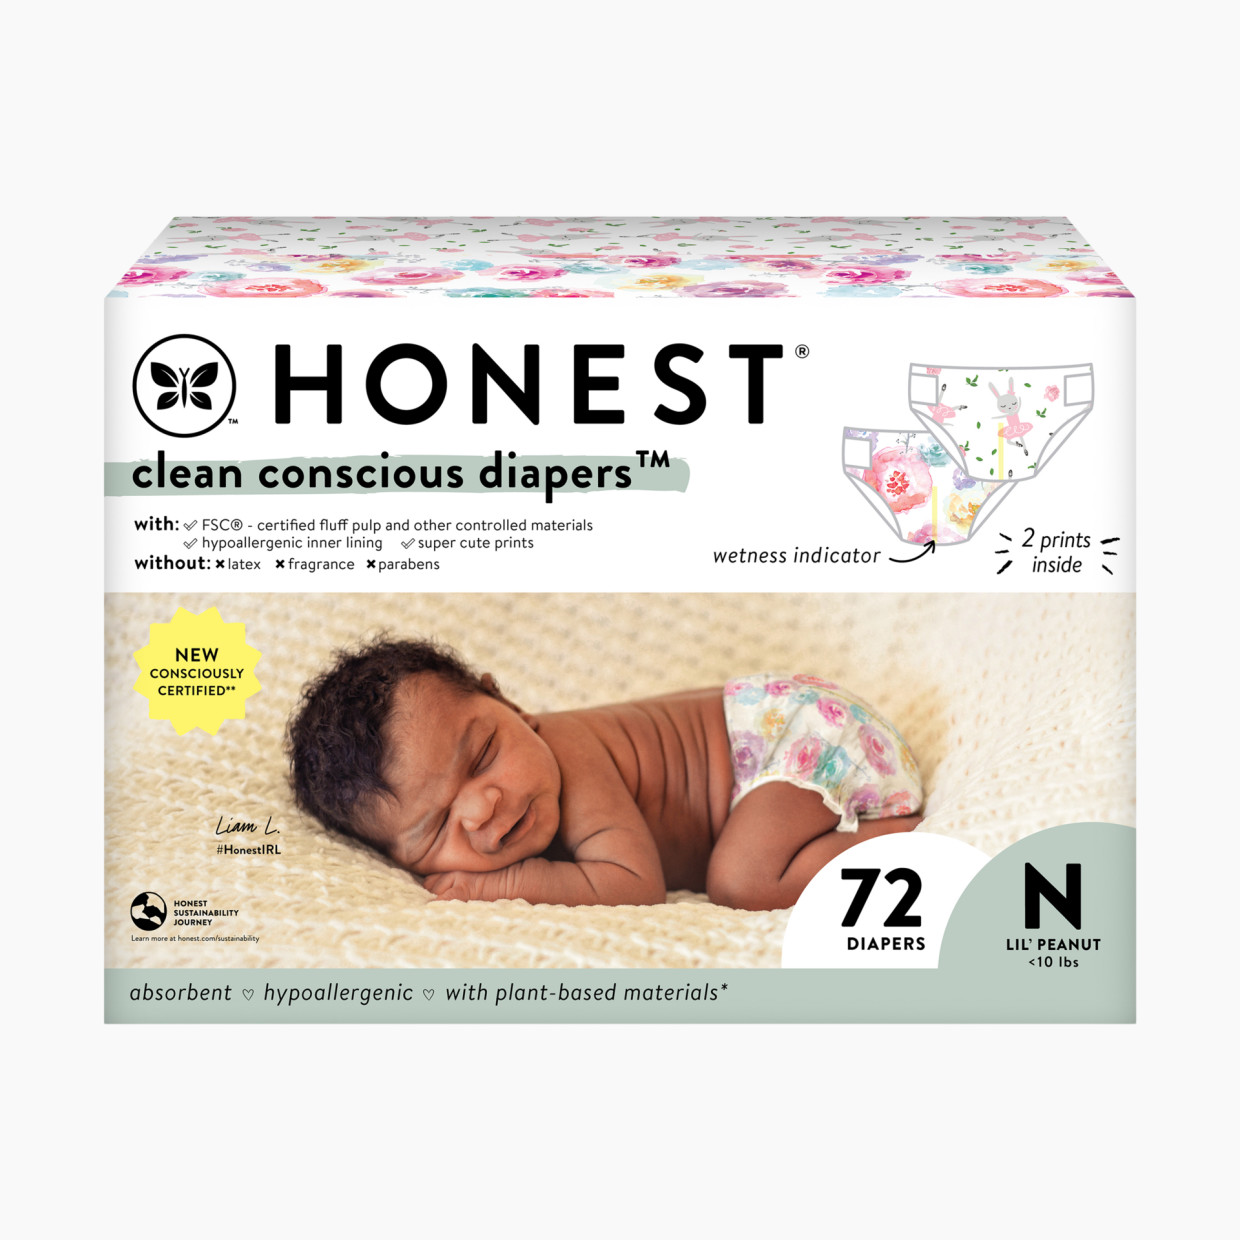 The Honest Company Clean Conscious Disposable Diapers - Rose Blossom + Tutu Cute, Nb, 72 Count.